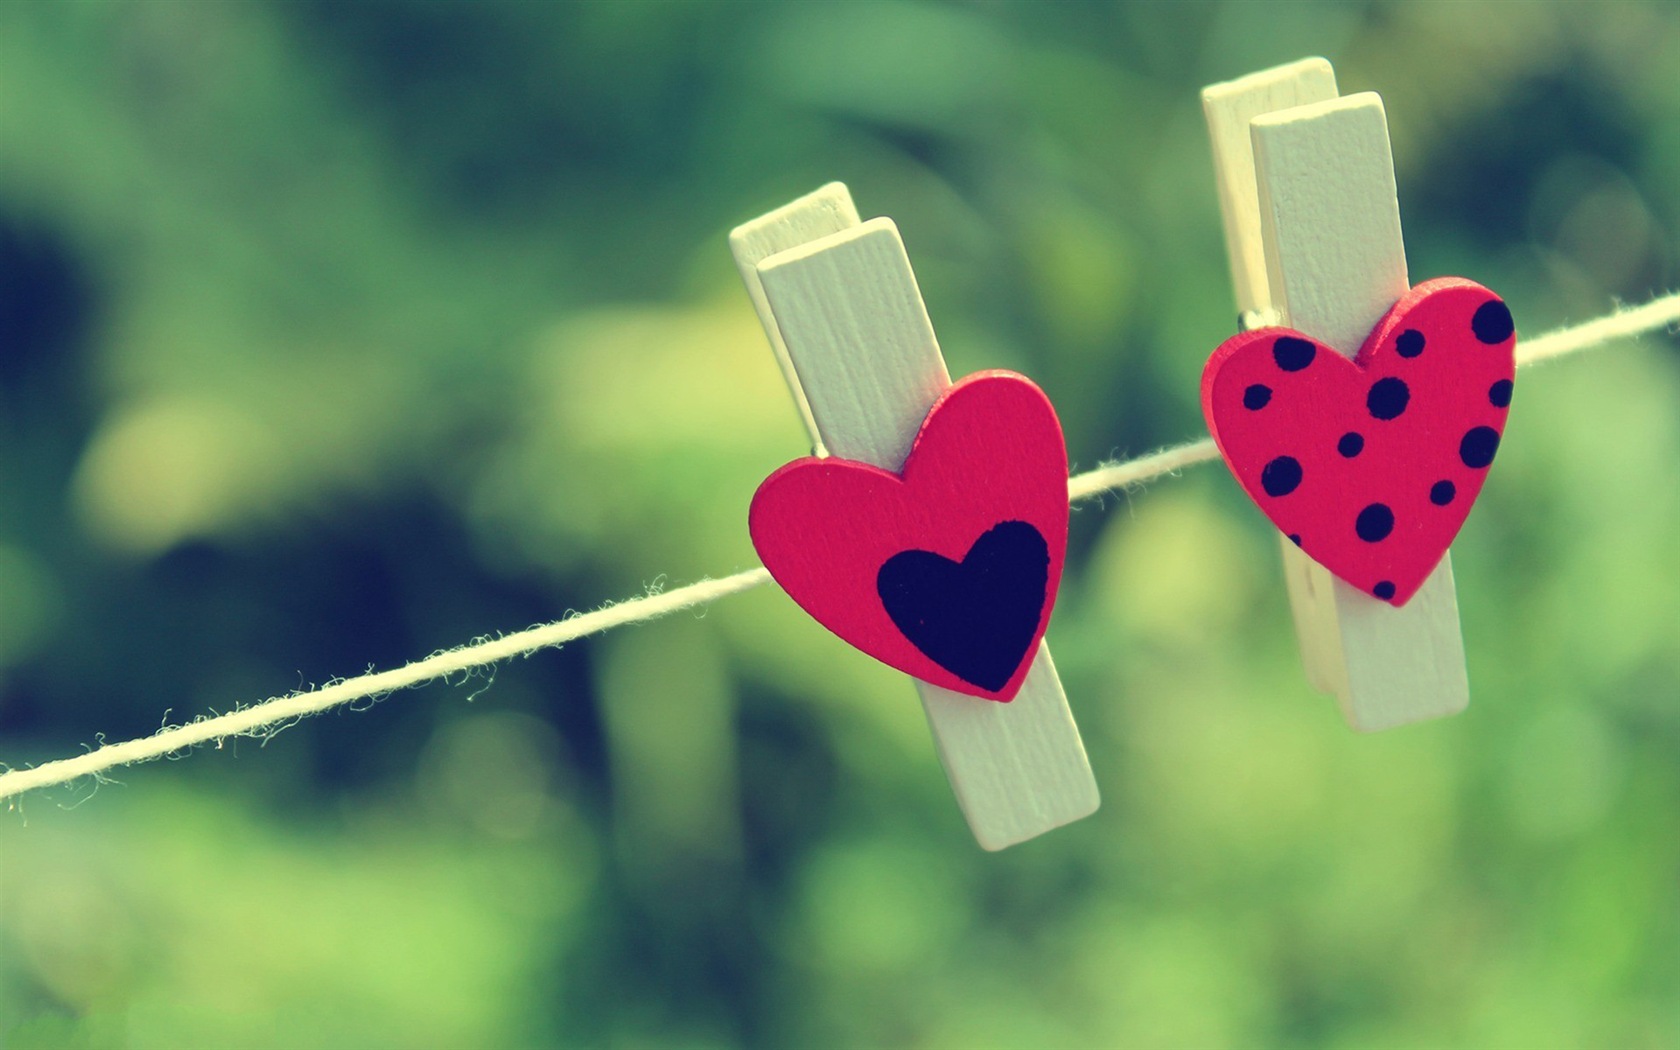 The theme of love, creative heart-shaped HD wallpapers #18 - 1680x1050